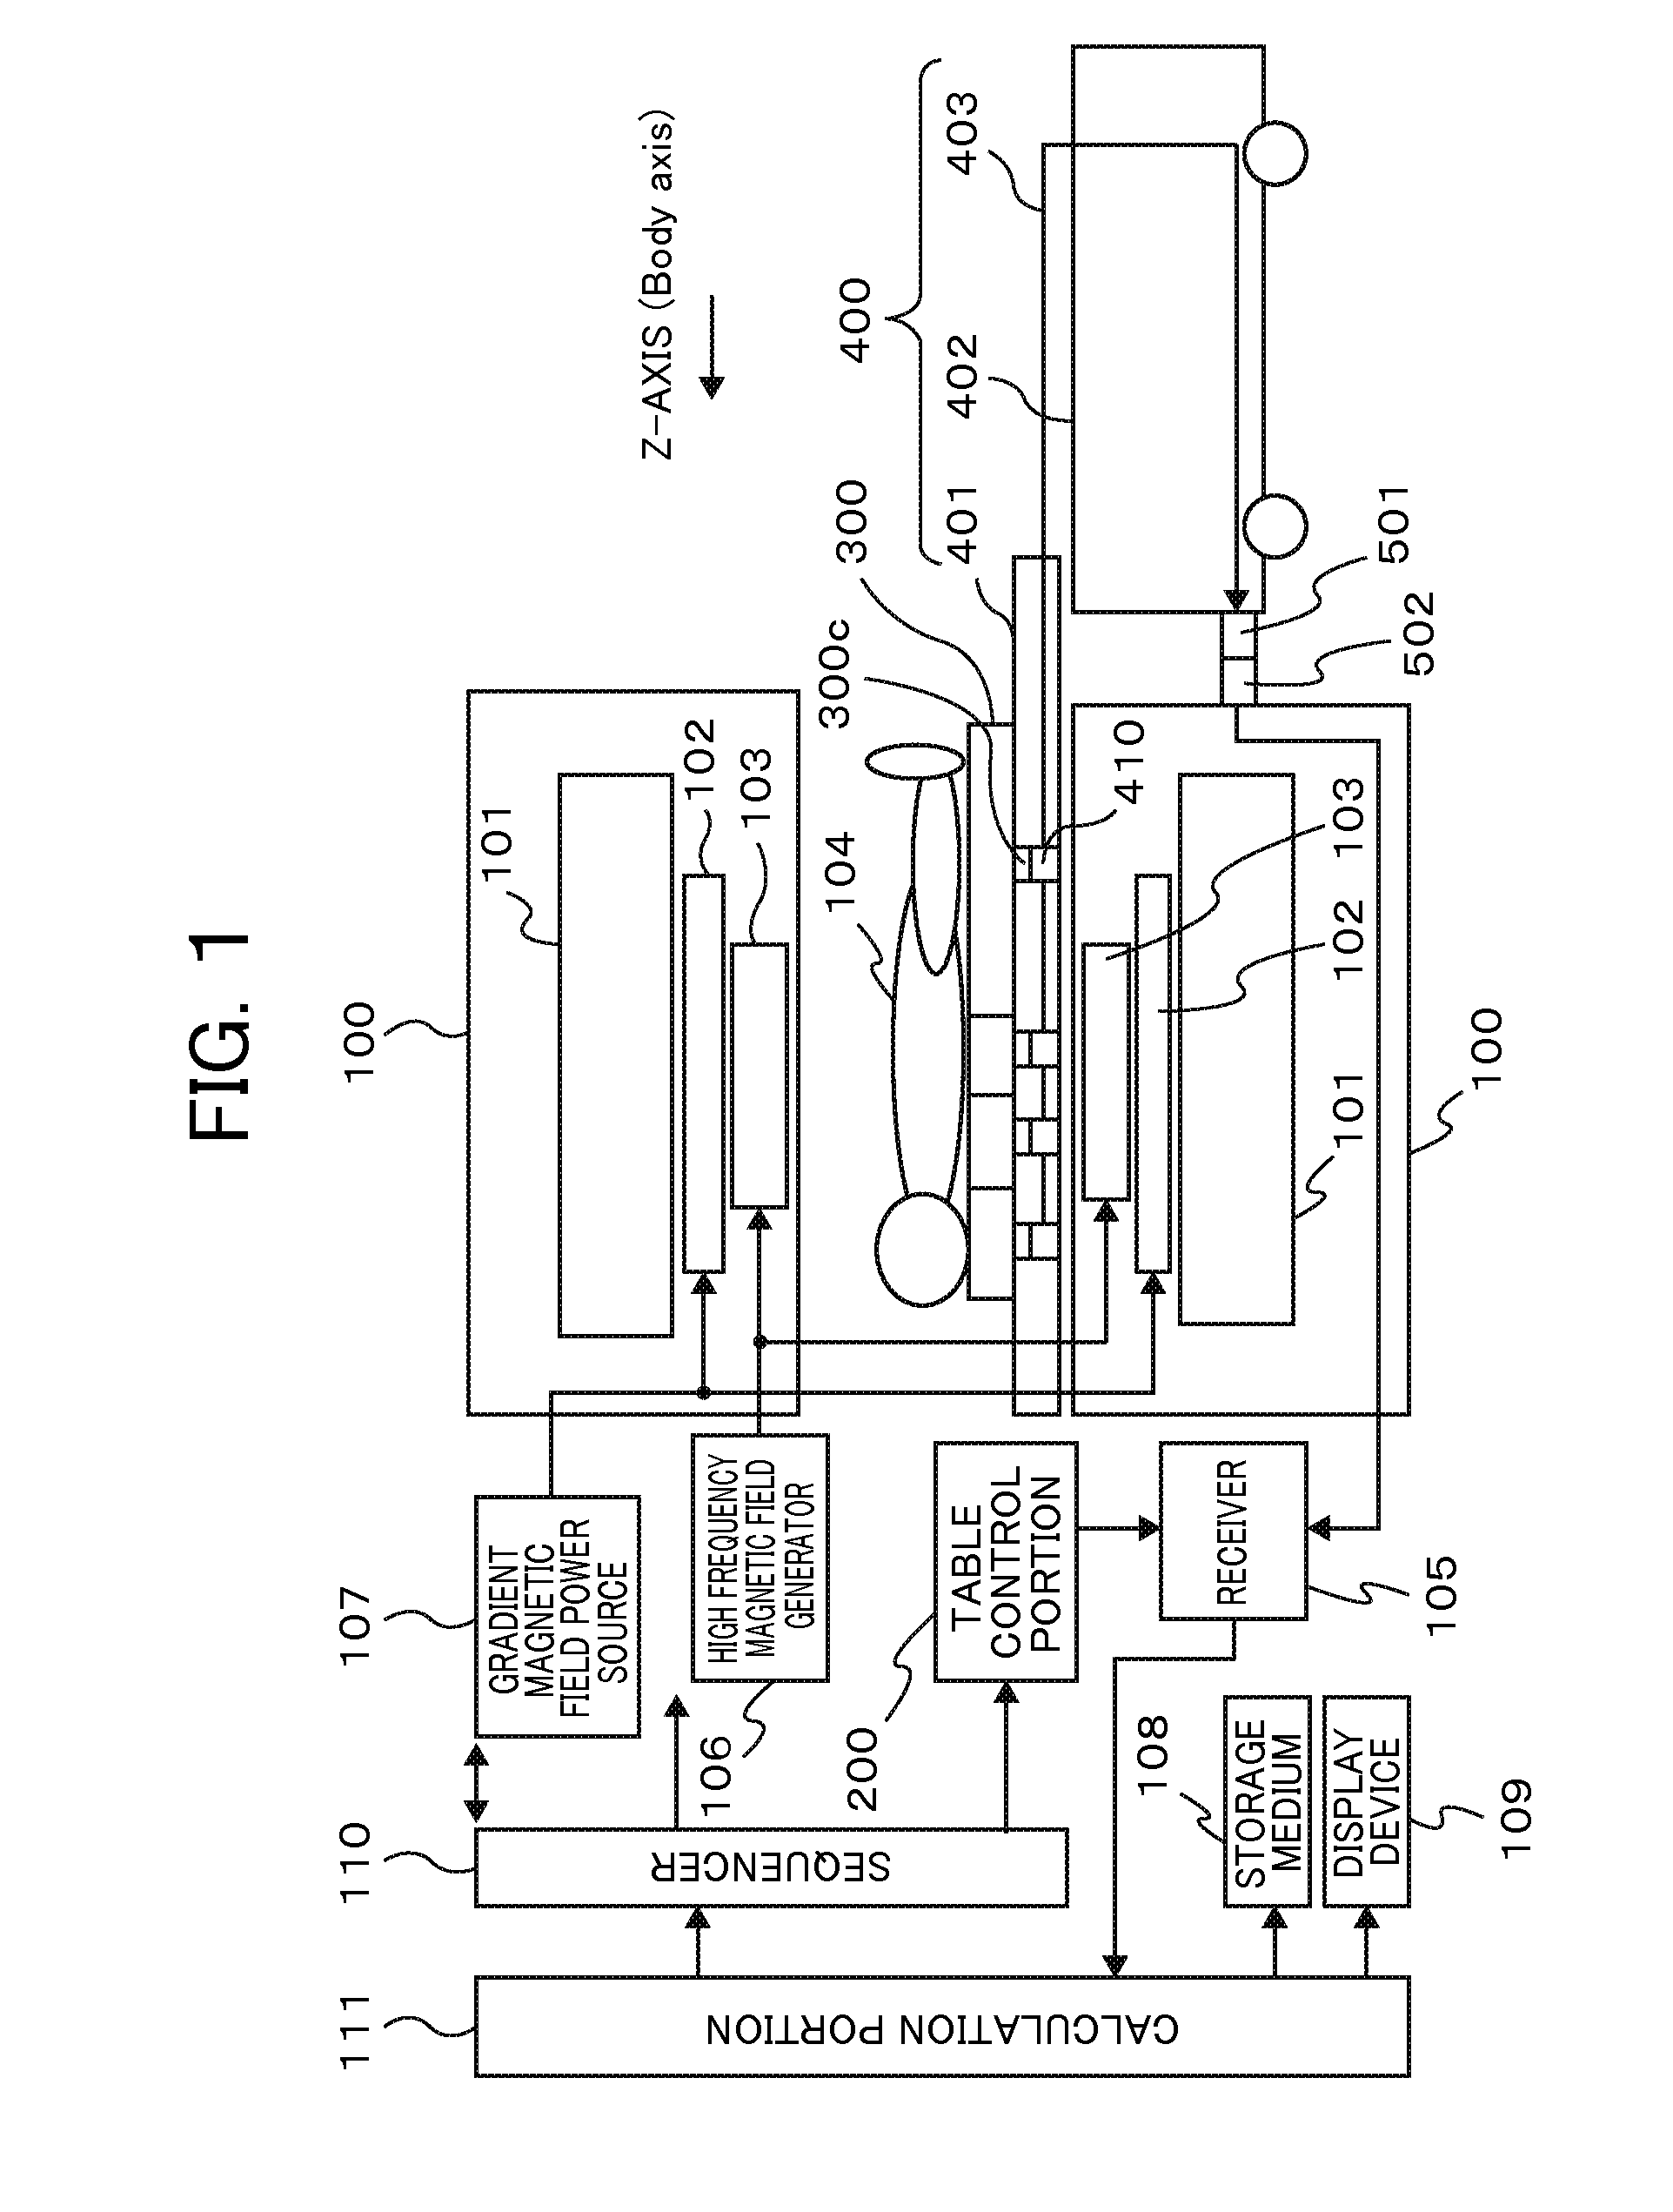 Magnetic resonance imaging device and RF coil